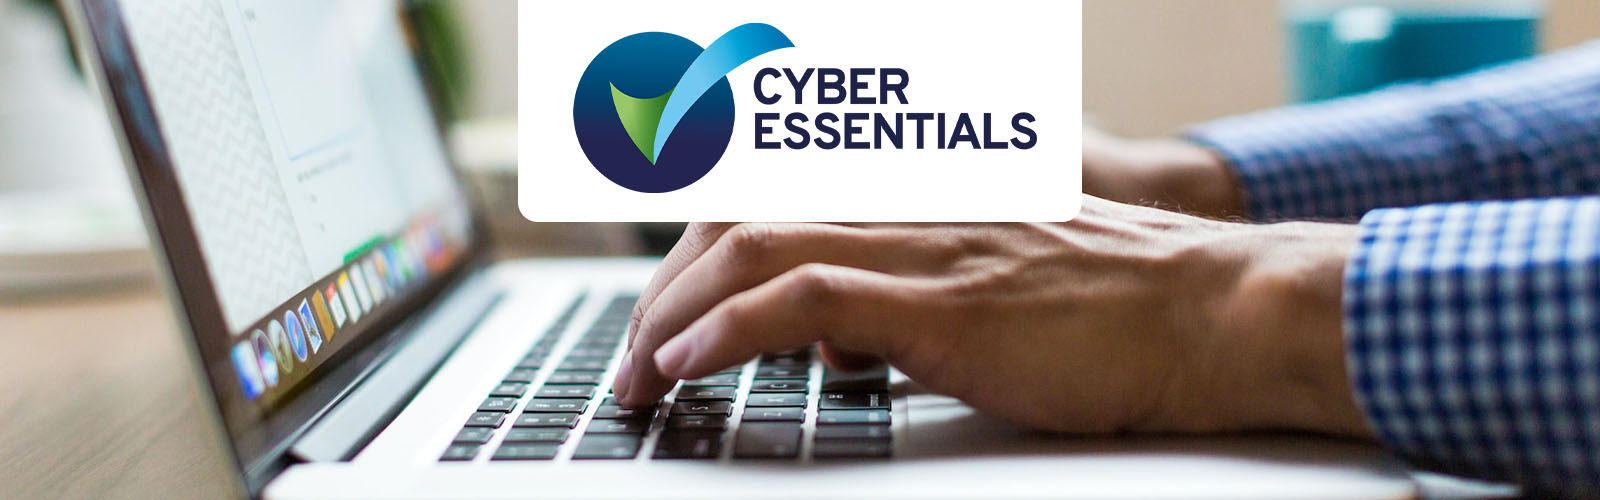 Cyber essentials logo over a man typing on a laptop